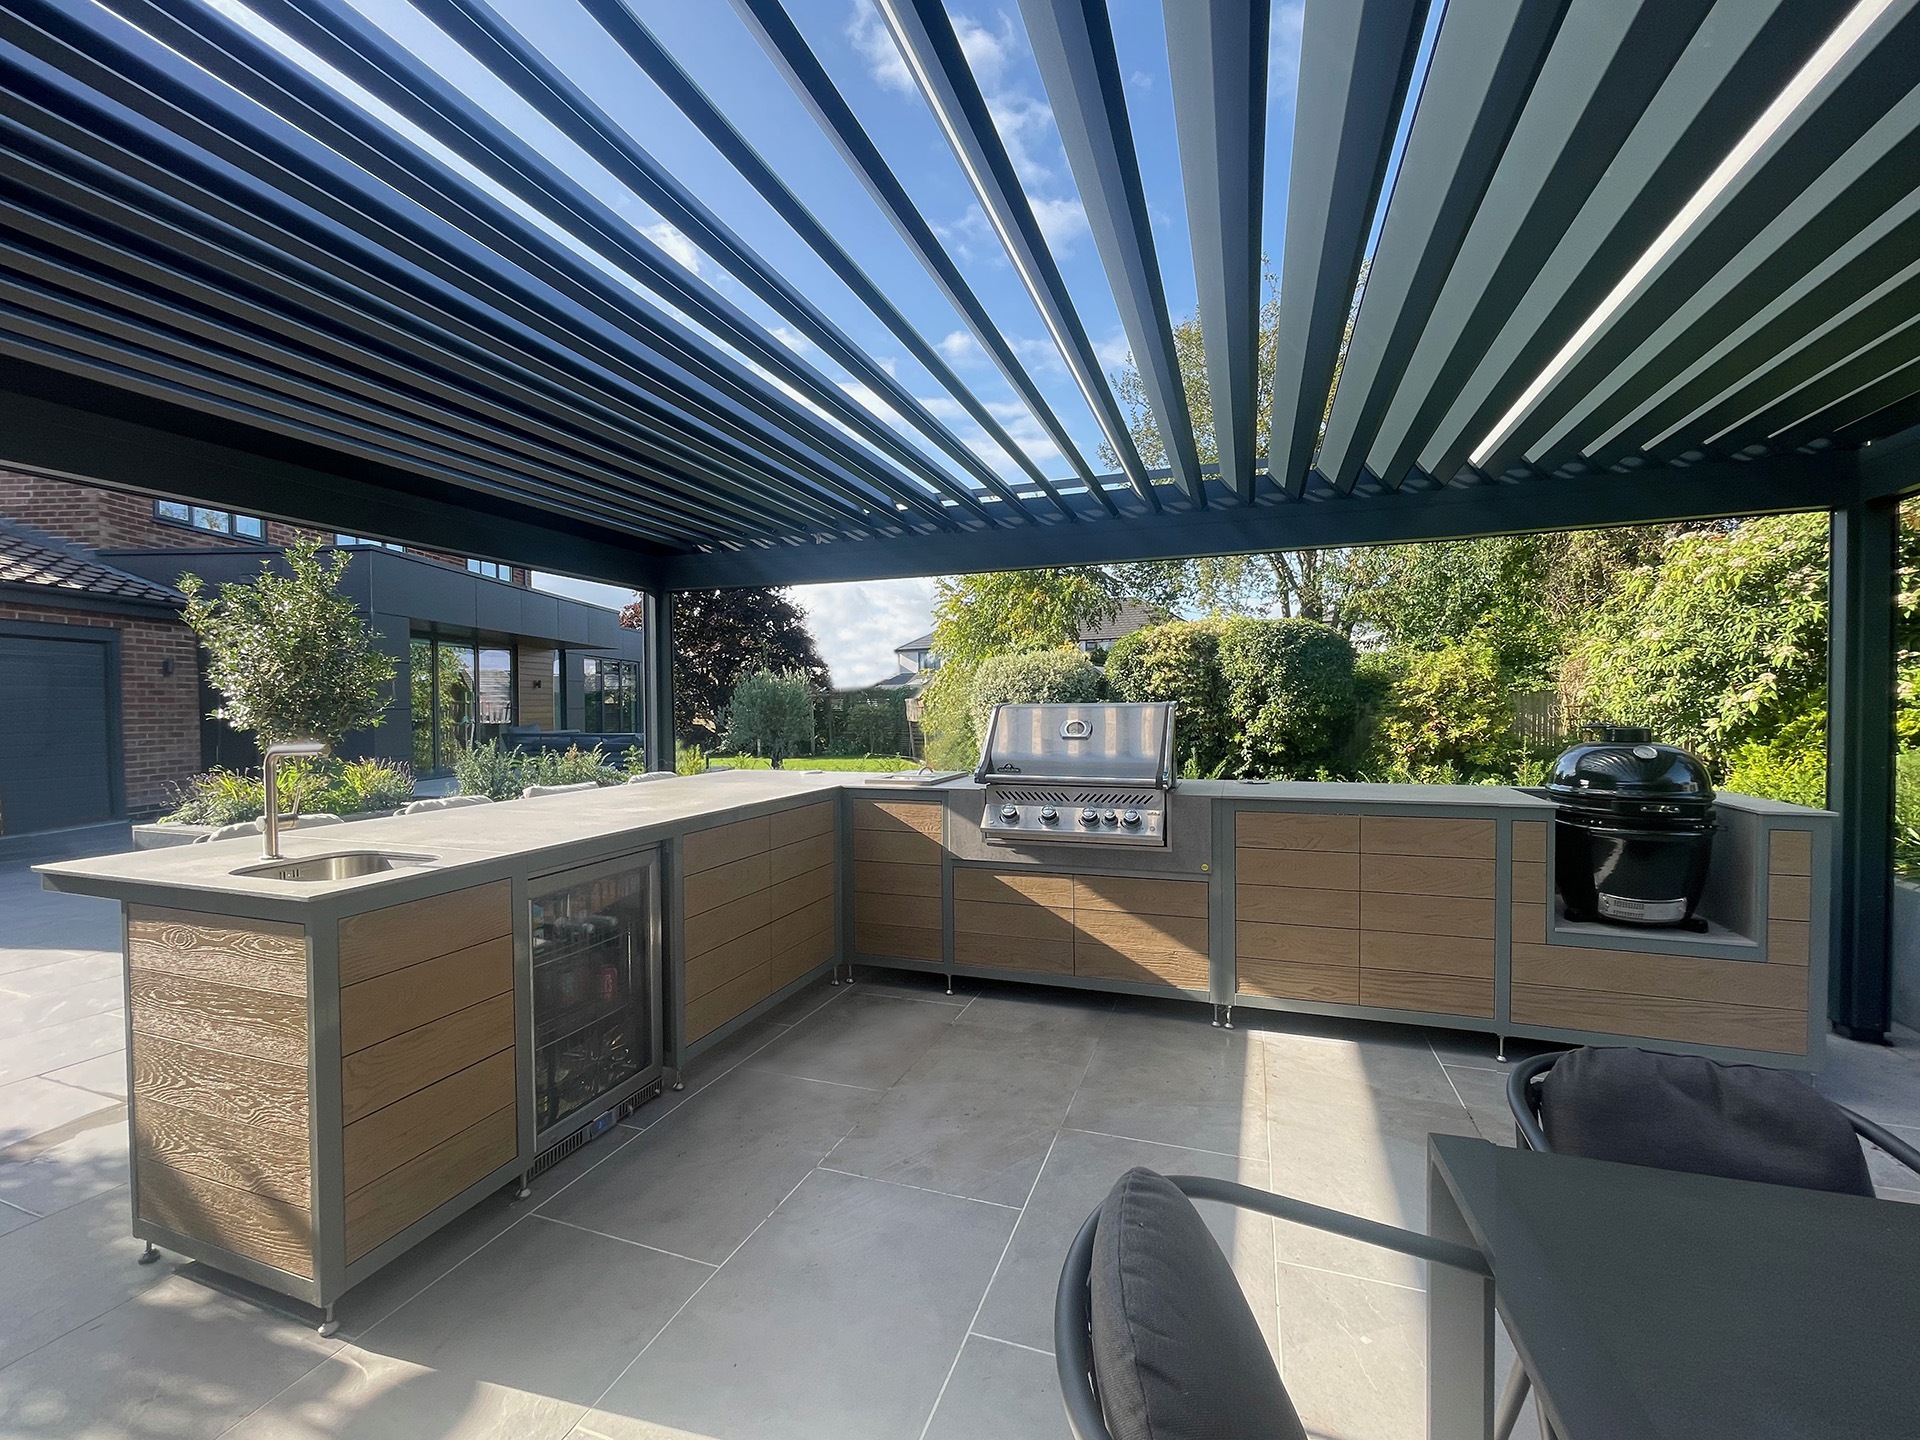 EQ Kitchens outdoor kitchen with BBQ and sink